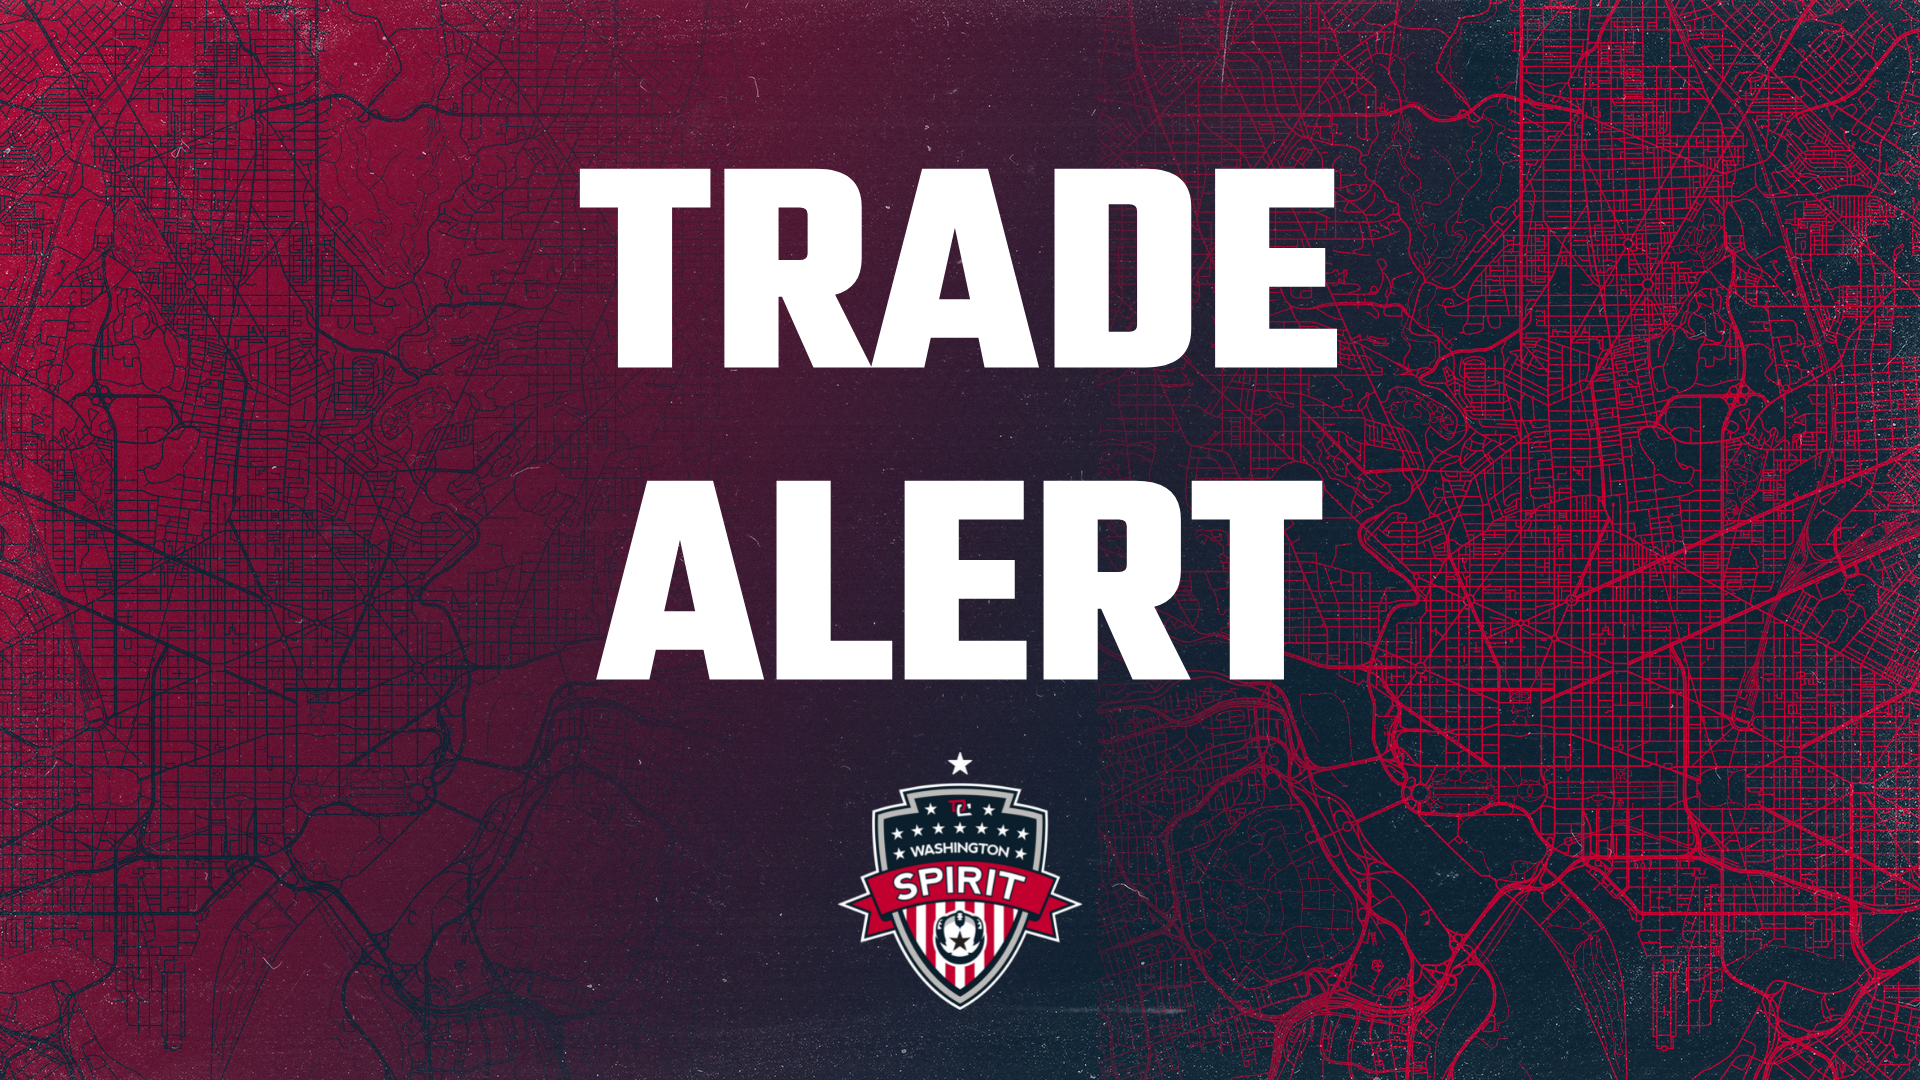 Washington Spirit Acquire the 15th Overall Pick, Send Allocation Money to OL Reign Featured Image